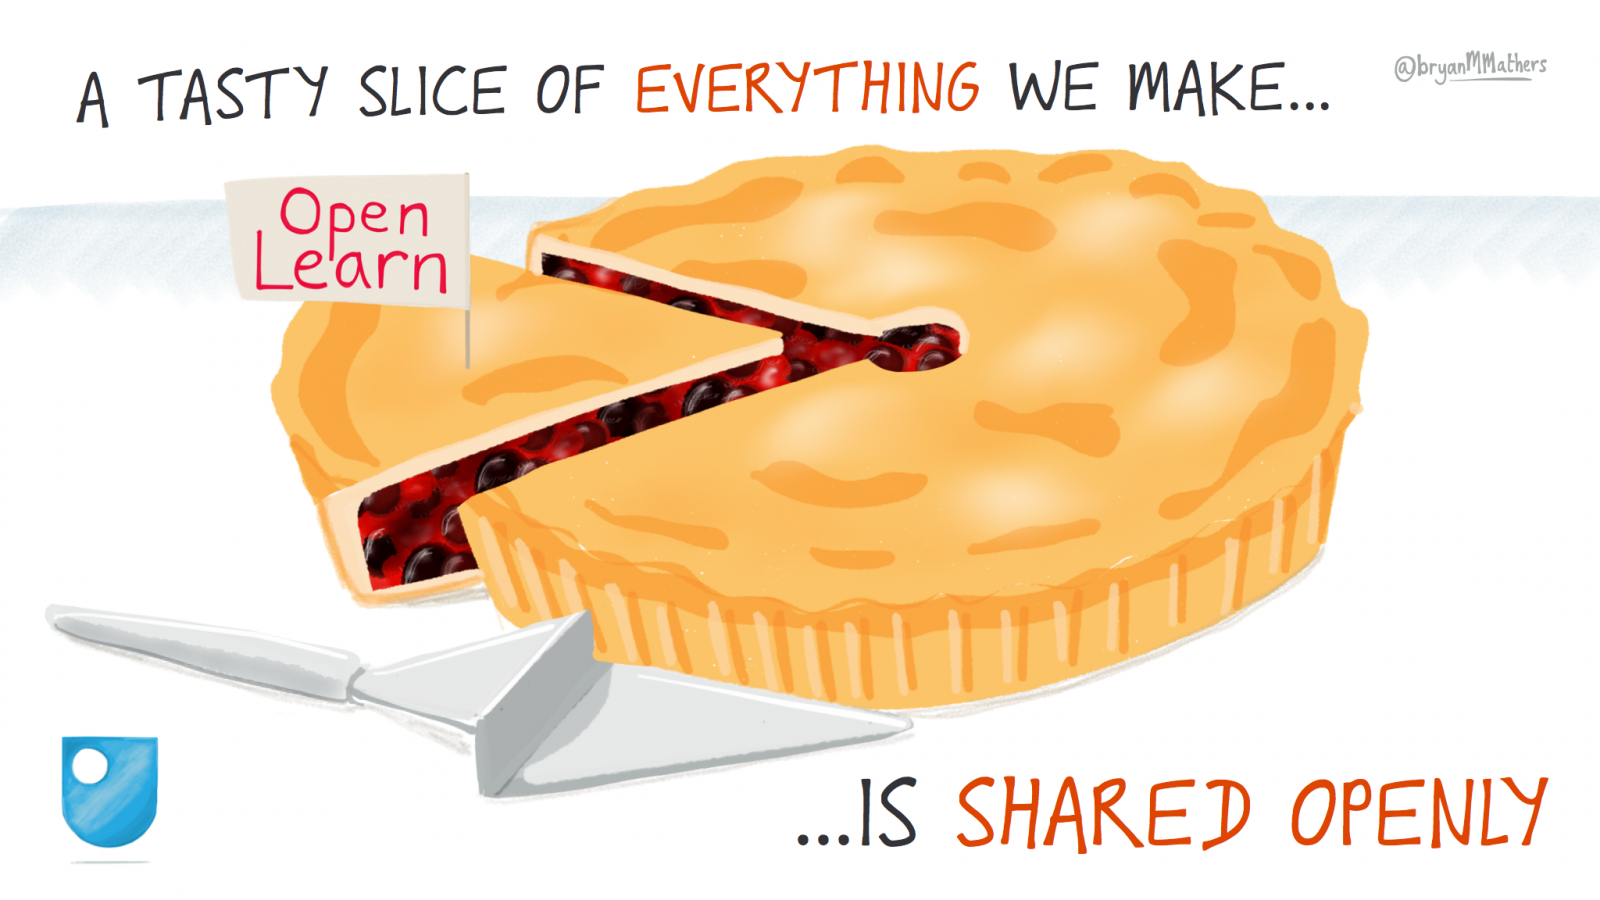 A tasty slice of everything we make is shared openly.